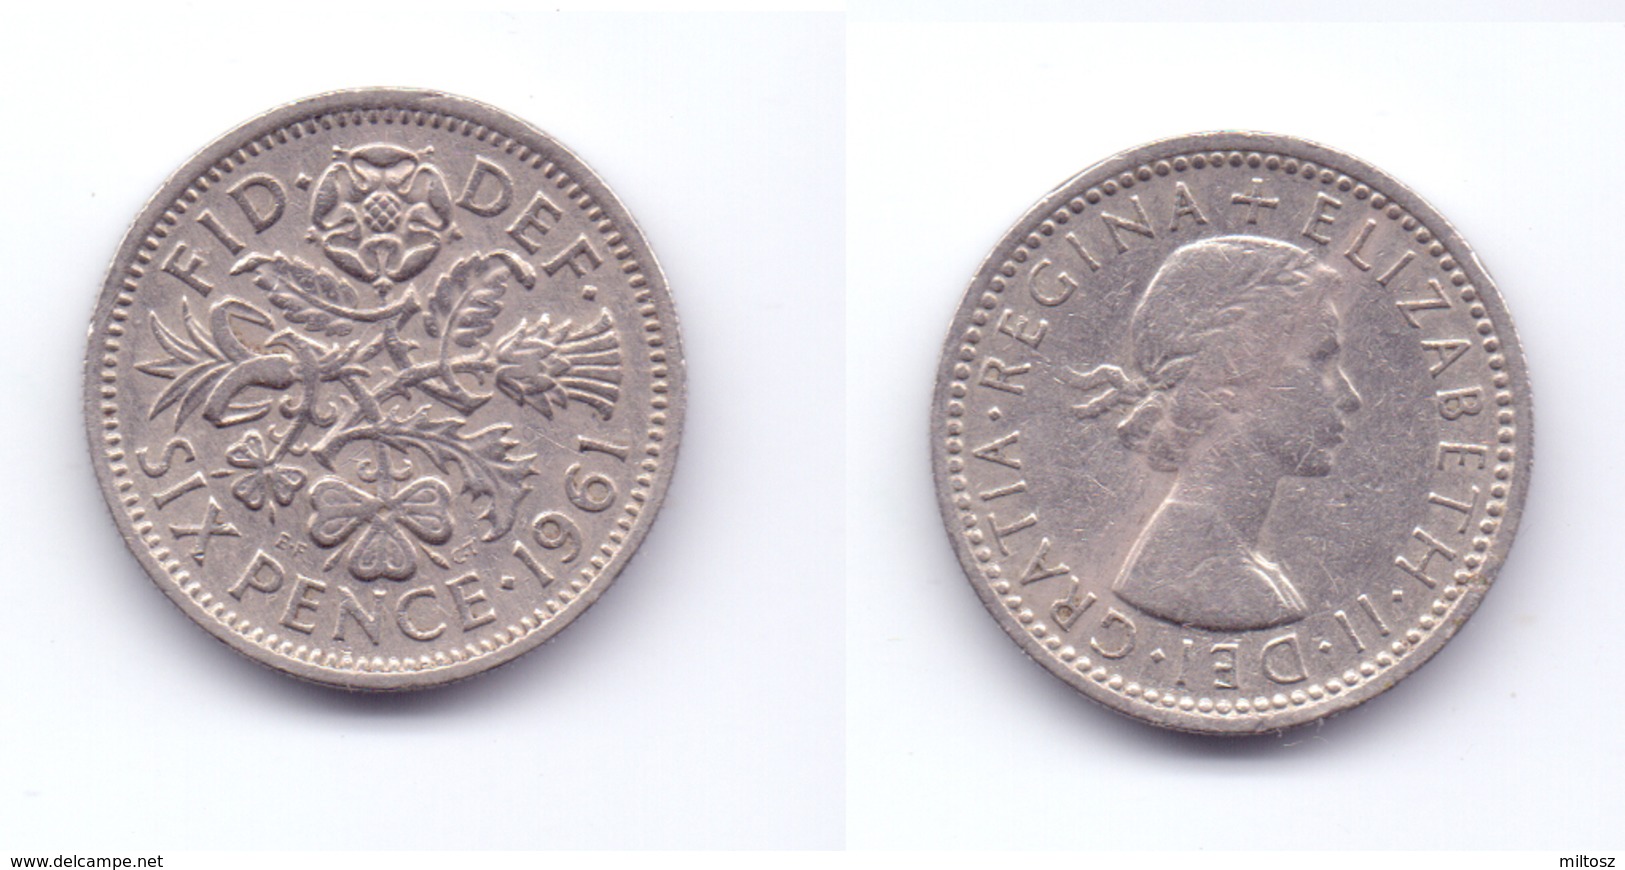 Great Britain 6 Pence 1961 - H. 6 Pence